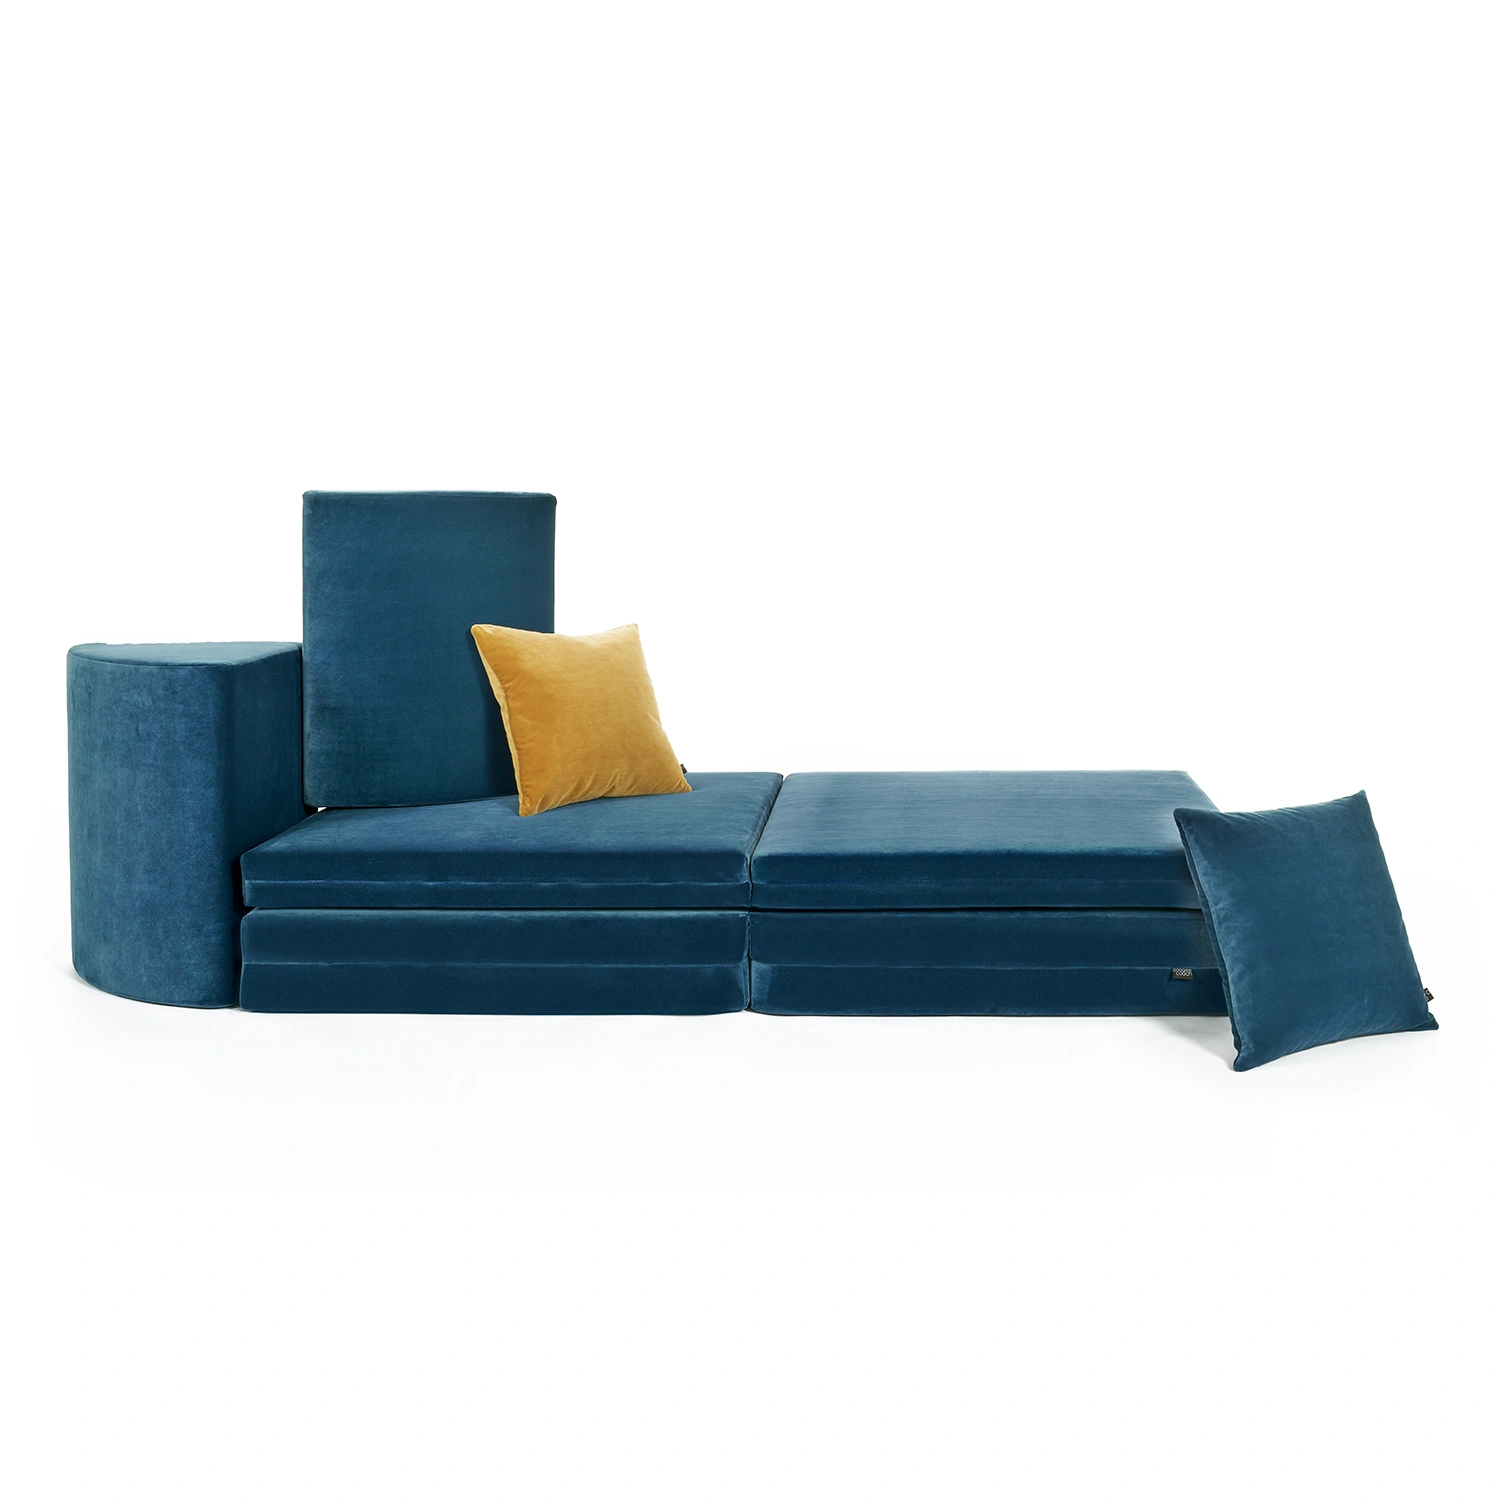 coogeecouch | Kindersofa | Serie: meeracle | Farbe: sea-blue hellblau | Ansicht: Korallenriff und 2 Kisssen | made in Germany